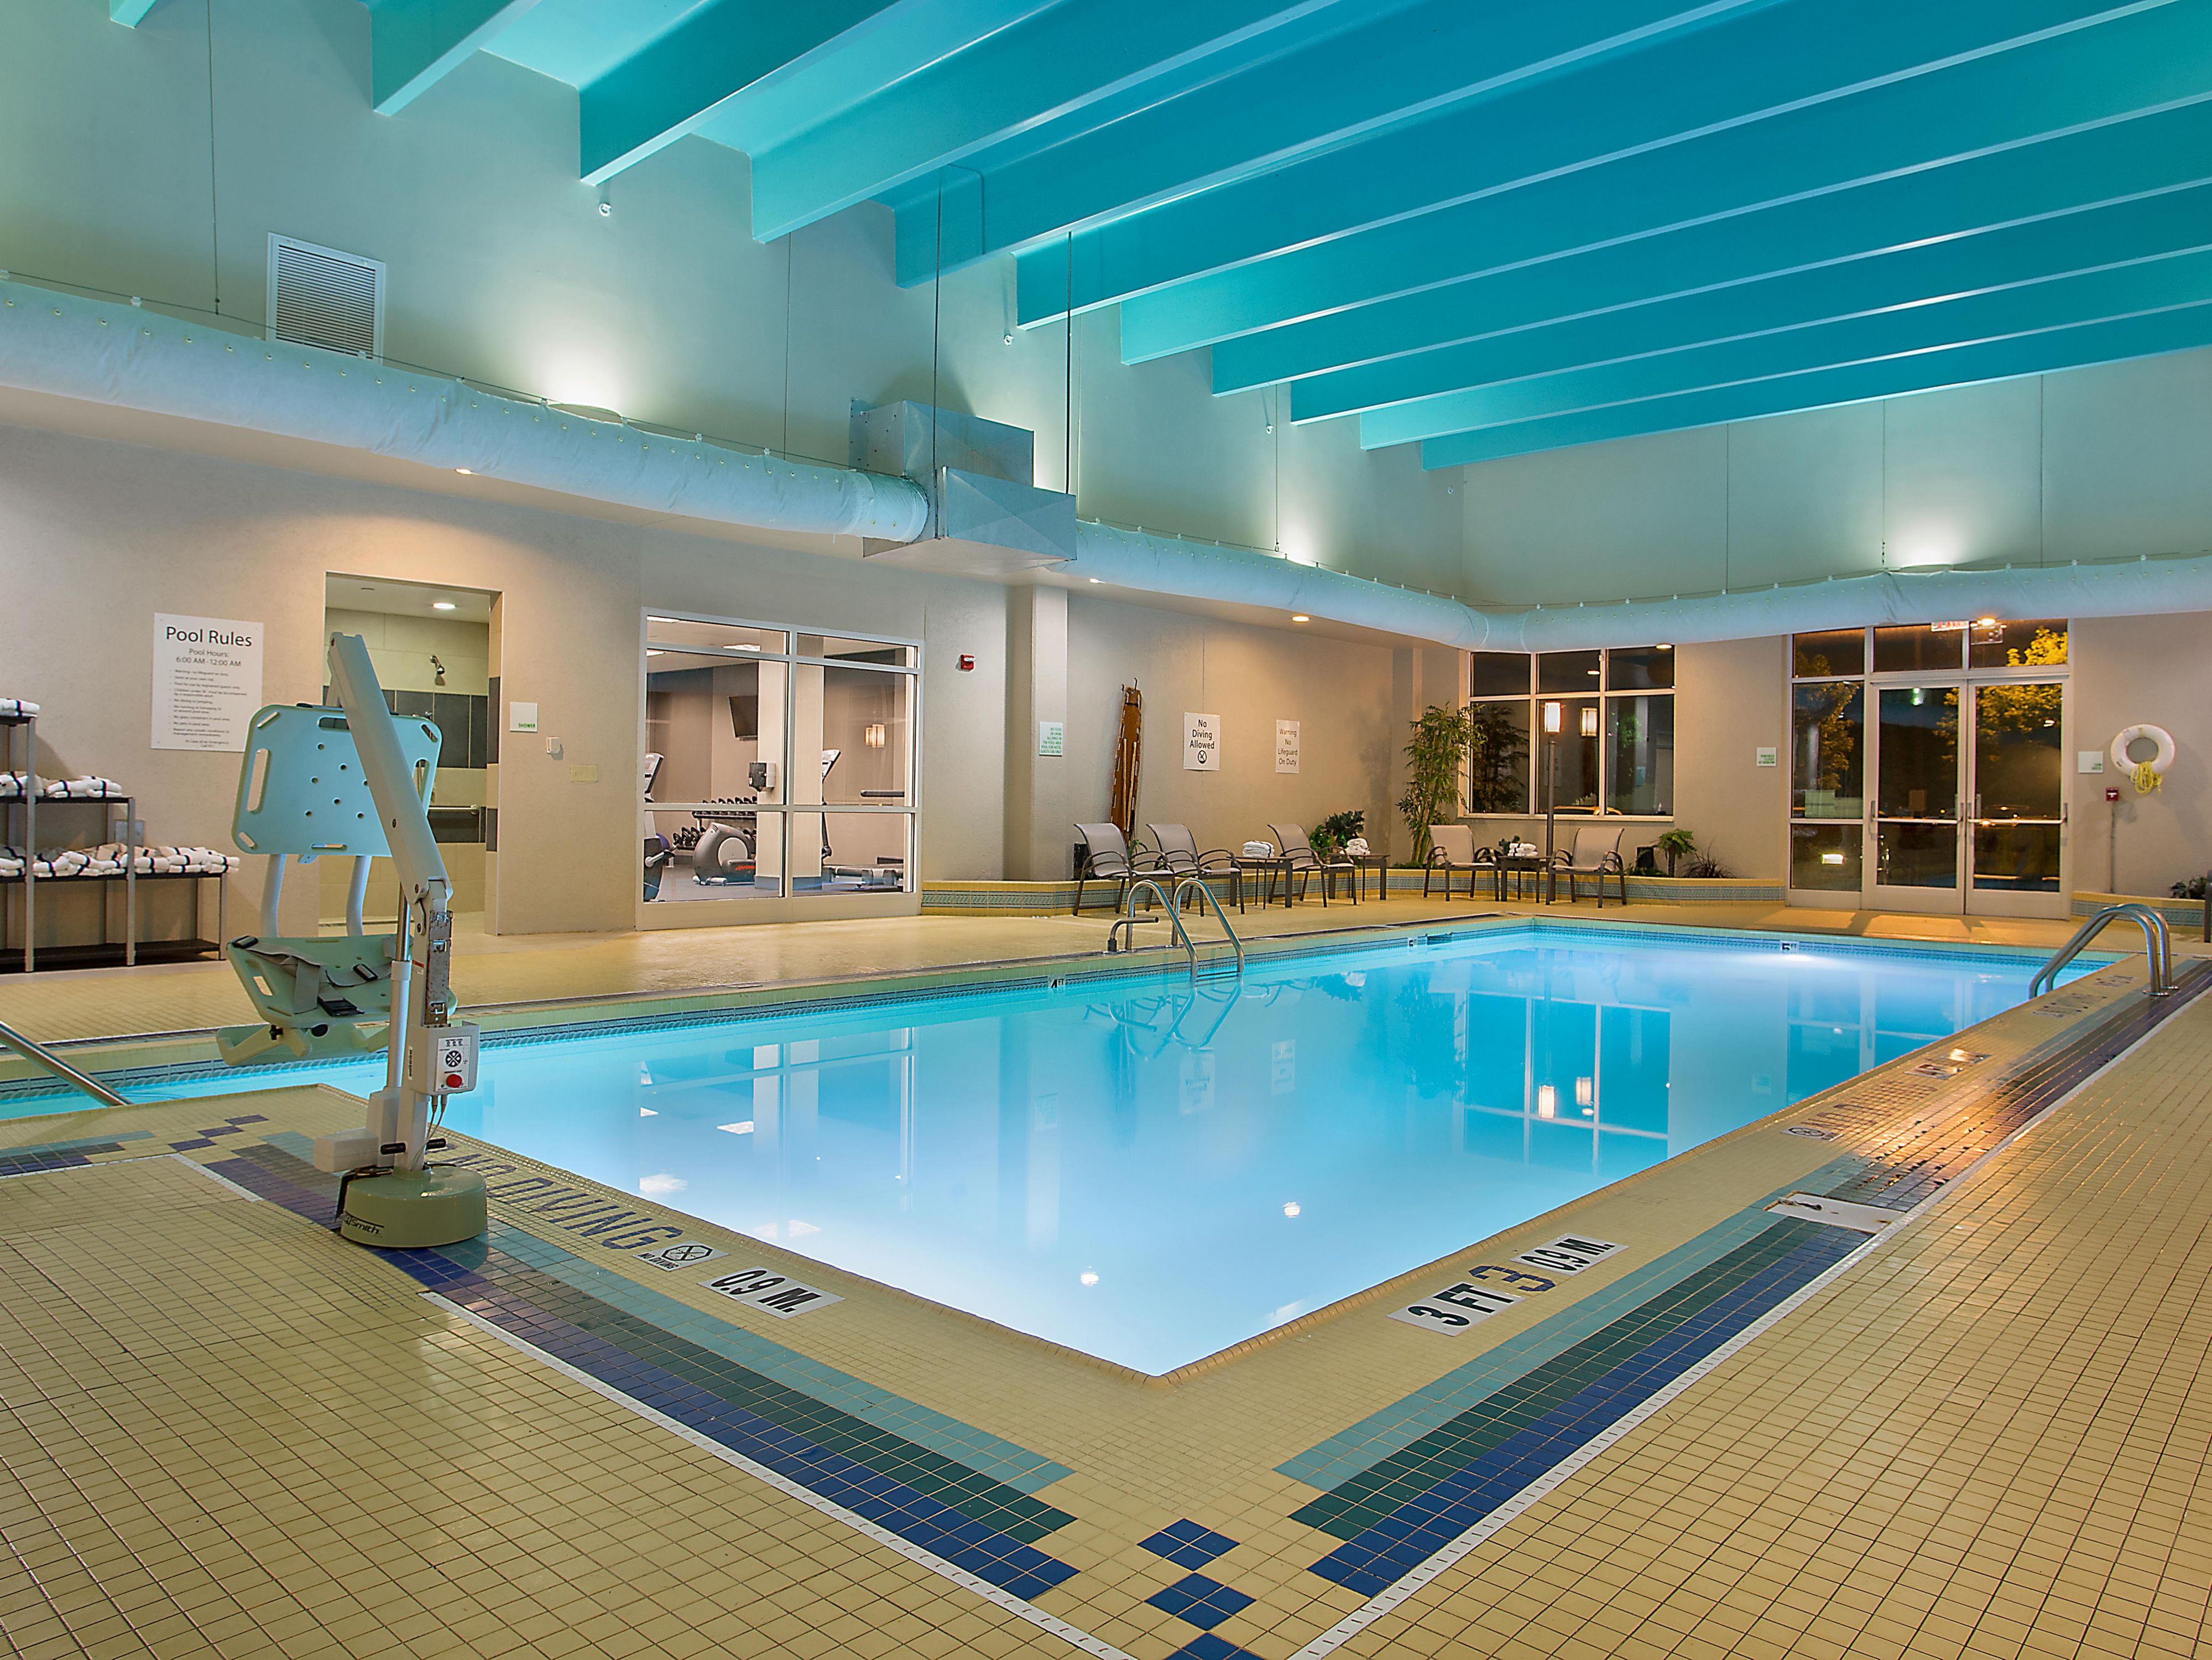 Enjoy a refreshing swim in our large indoor pool - the perfect spot for morning laps or an afternoon dip. Get energized in our Fitness Center with free weights and cardio equipment, including treadmills, elliptical cross trainers, and bikes. Experience a Bowling Green hotel designed for travel and wellness.